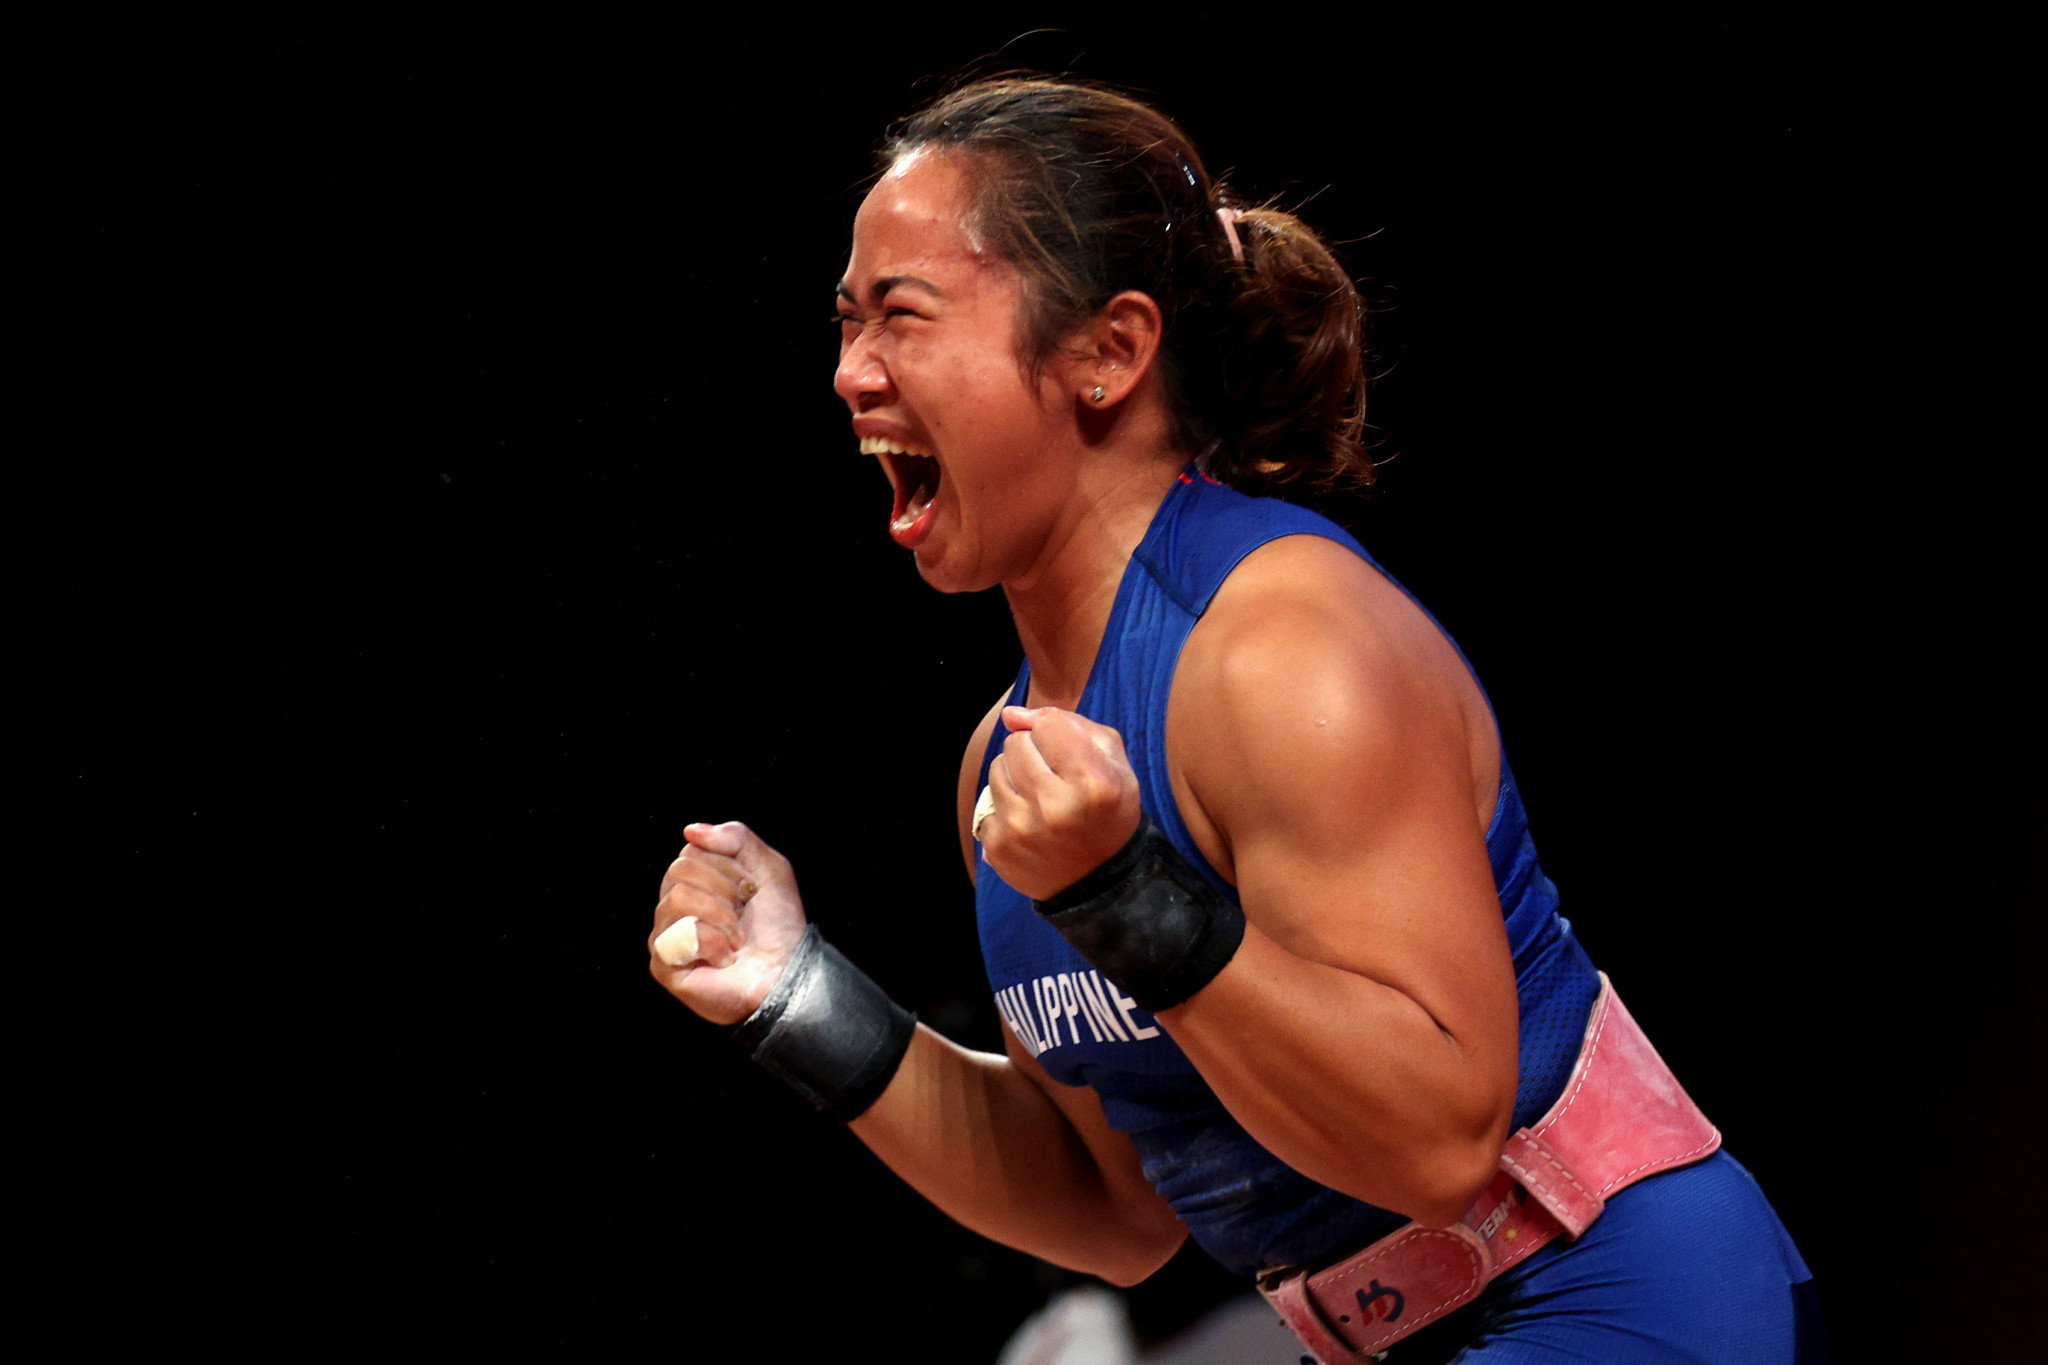 The Philippines' Hidilyn Diaz was one of the stars of the weightlifting events at Tokyo 2020 ©Getty Images